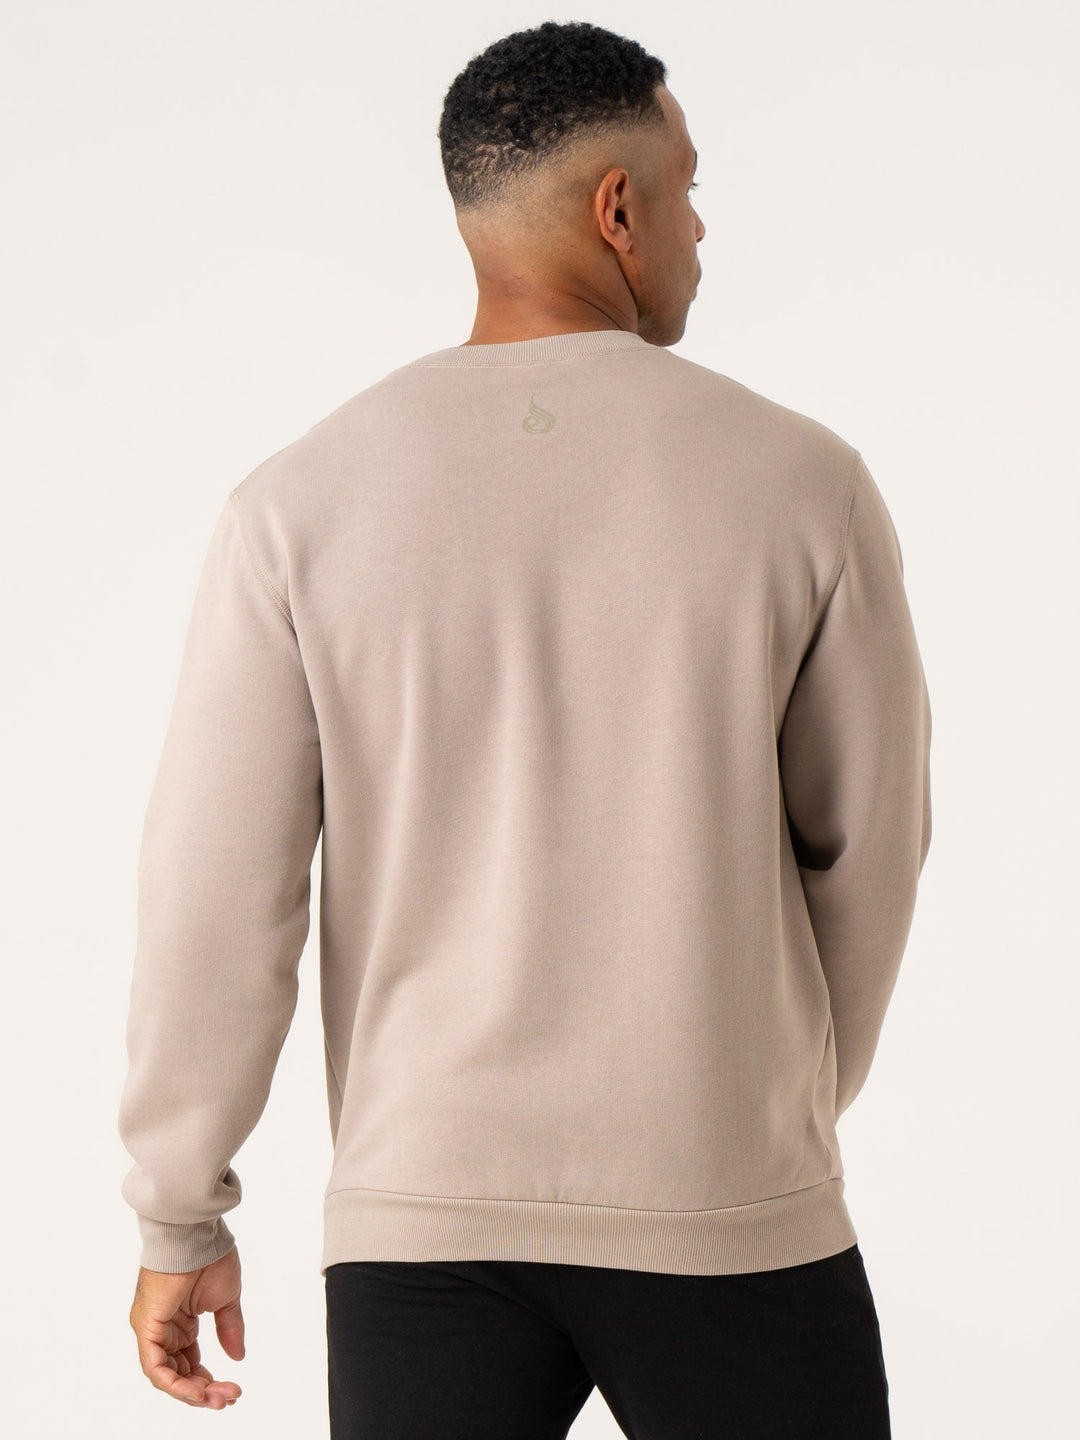 Pursuit Pullover - Taupe Clothing Ryderwear 